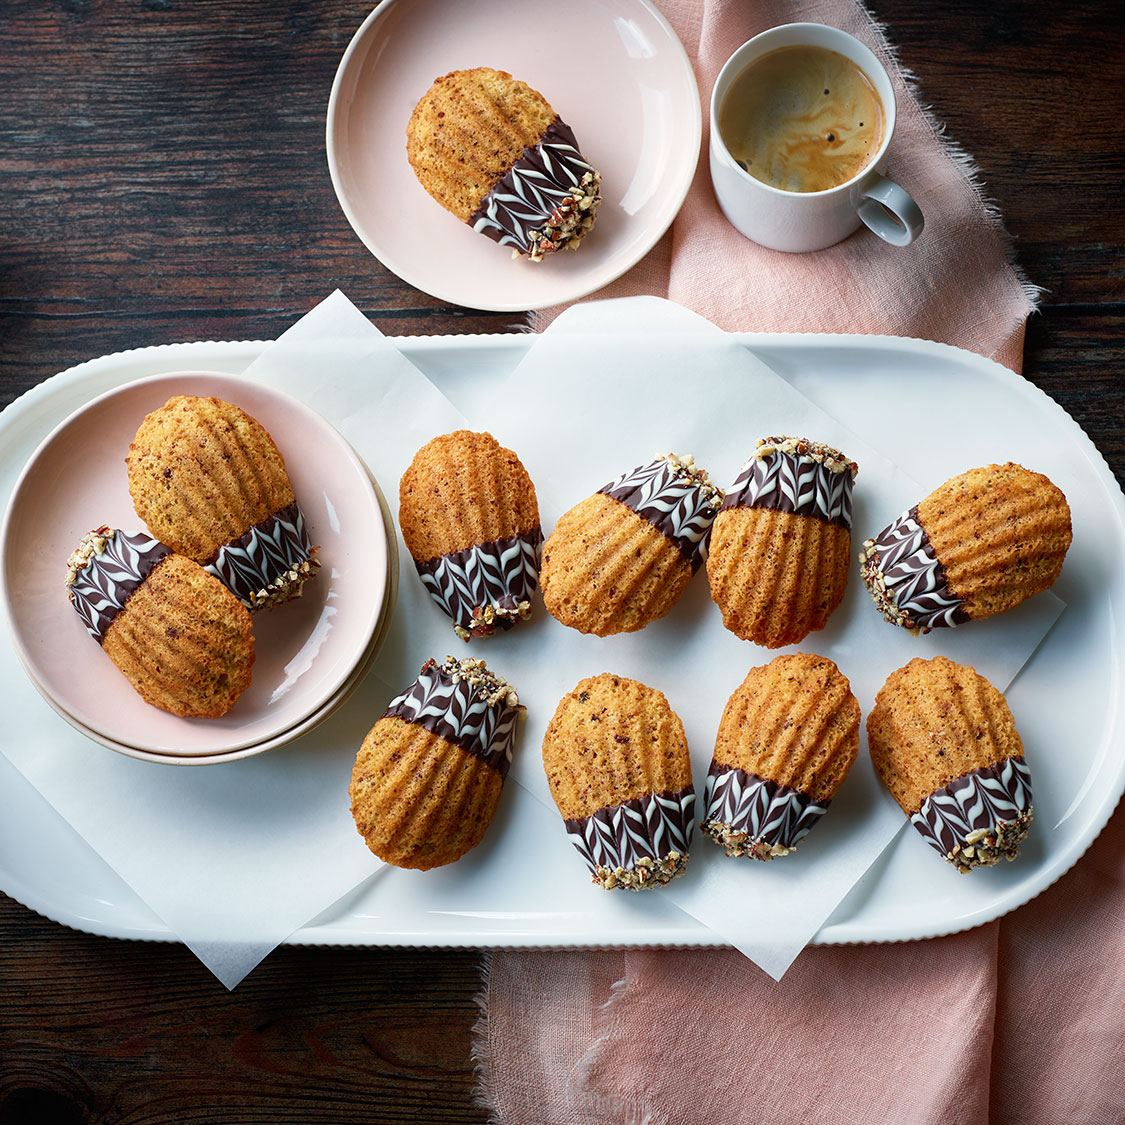 Prue Leith's Maple & Pecan Madeleines - The Great British Bake Off